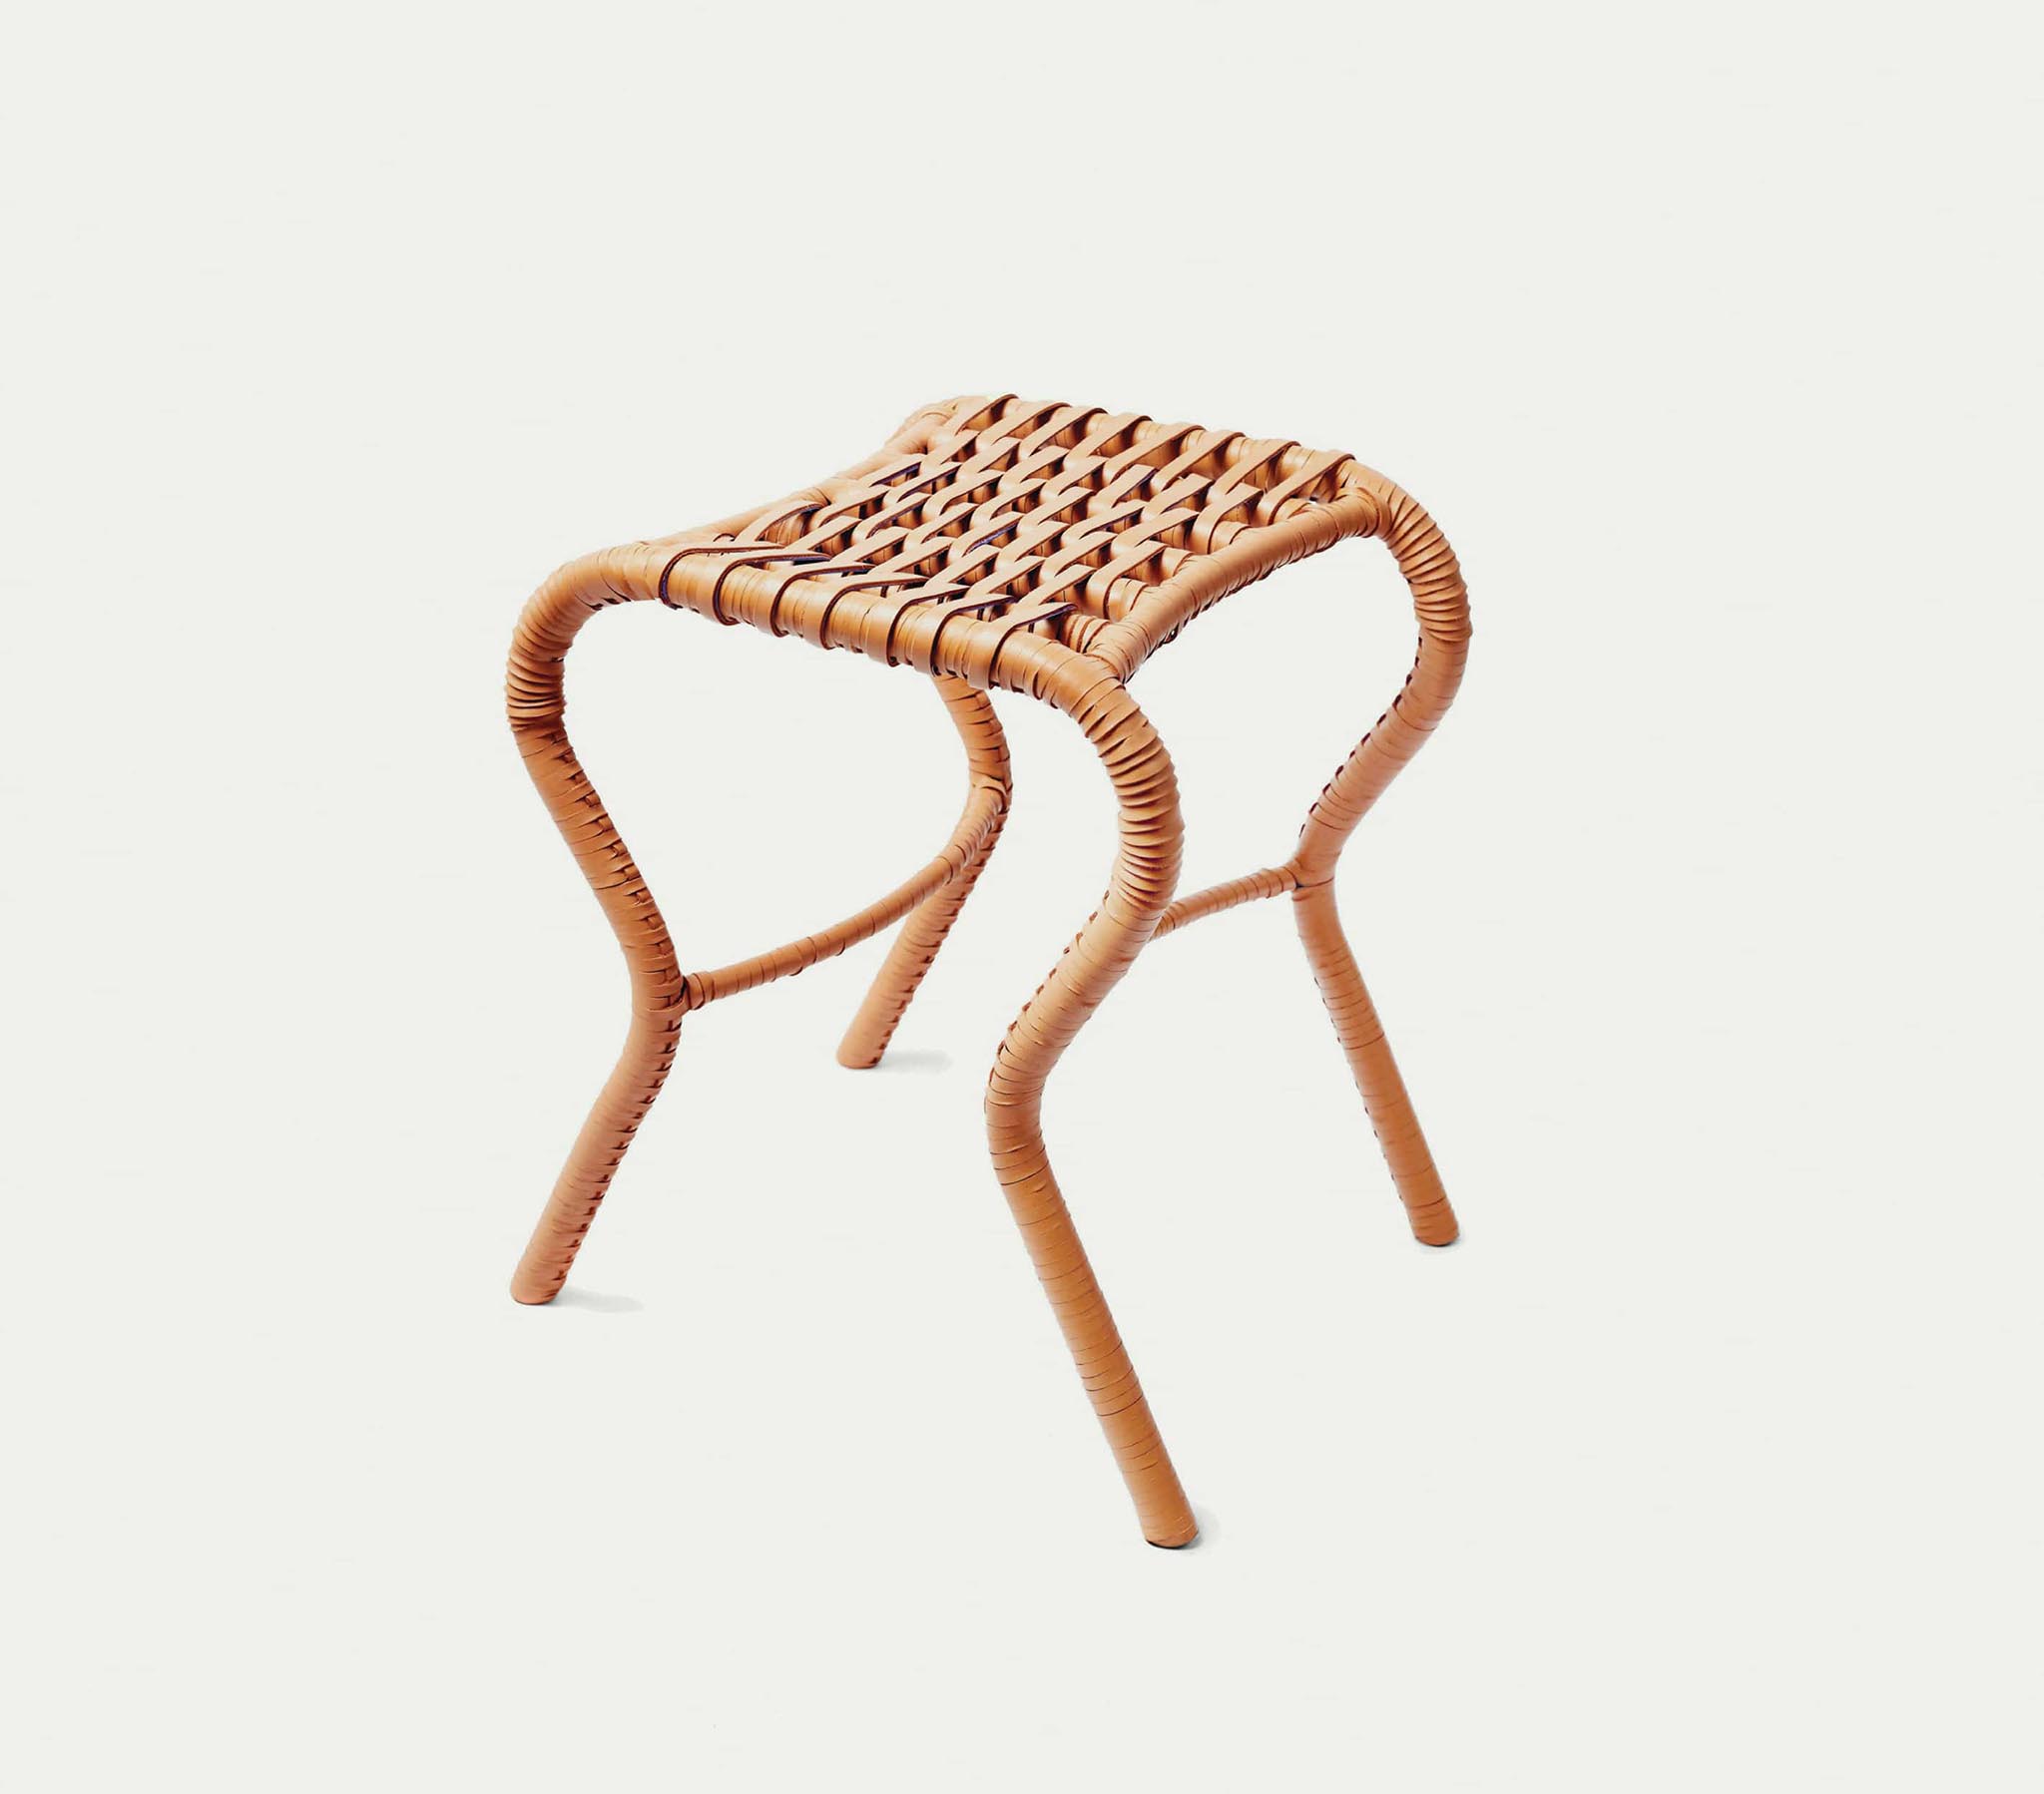 sculptural woven leather bata stool by Lani Adeoye